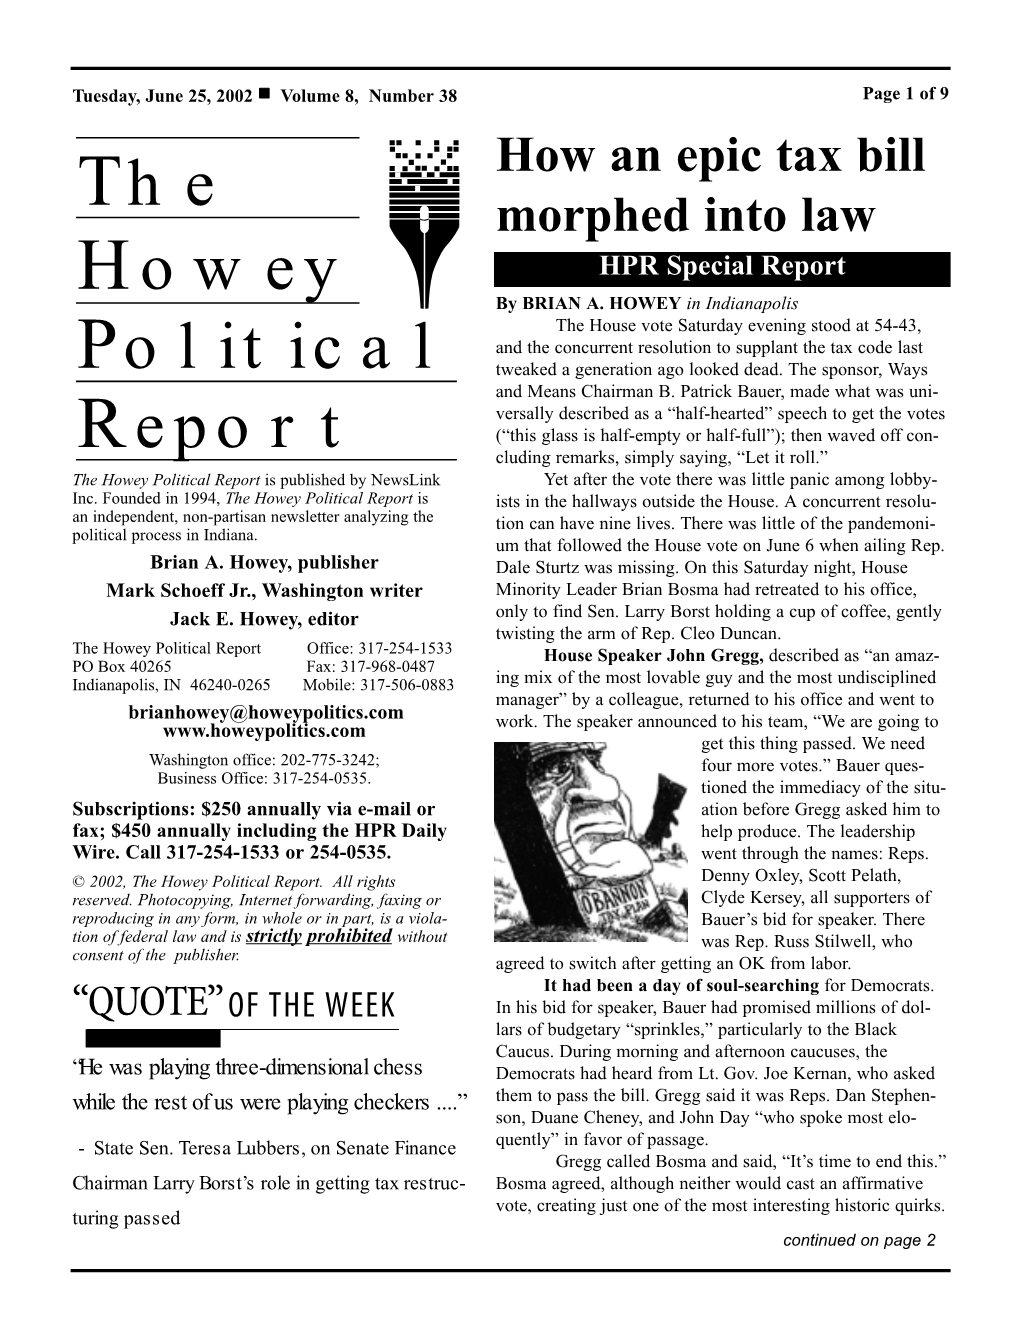 The Howey Political Report Is Published by Newslink Yet After the Vote There Was Little Panic Among Lobby- Inc